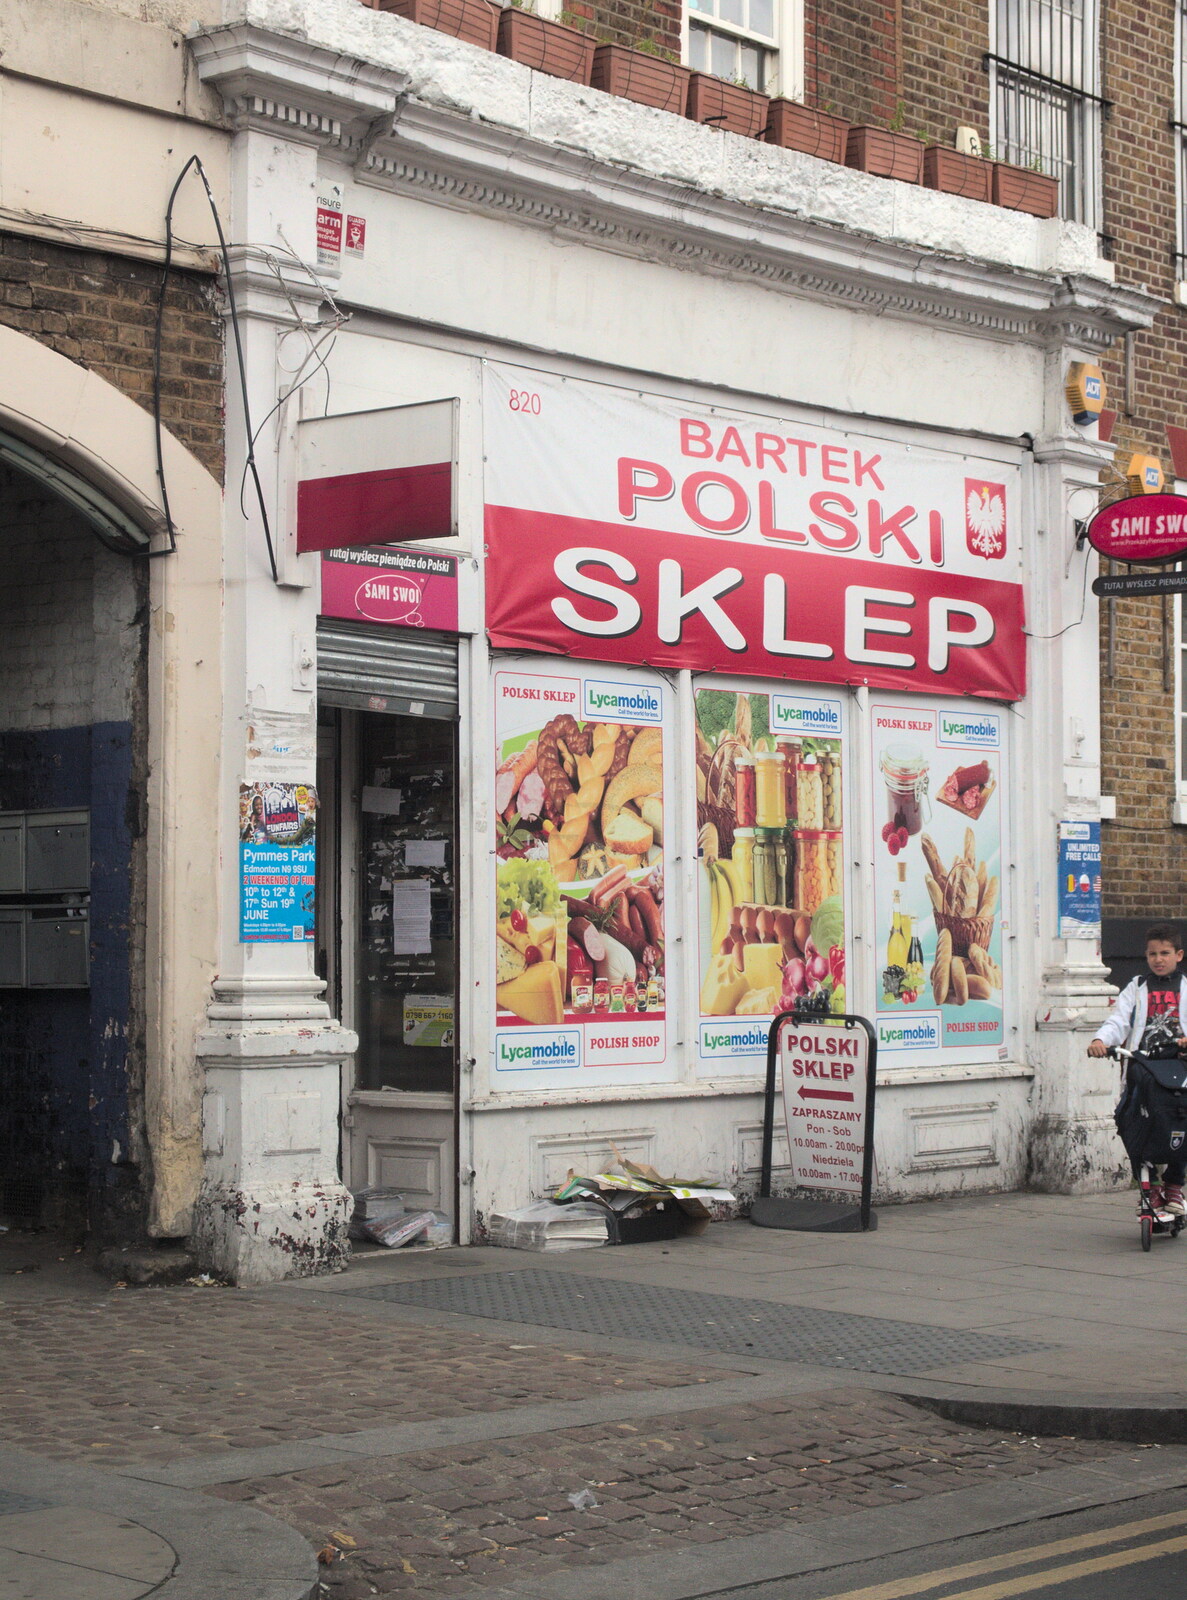 Polish shop on Seven Sisters Road from Caoimhe the Shoe's Desk, Highbury, London - 18th June 2016